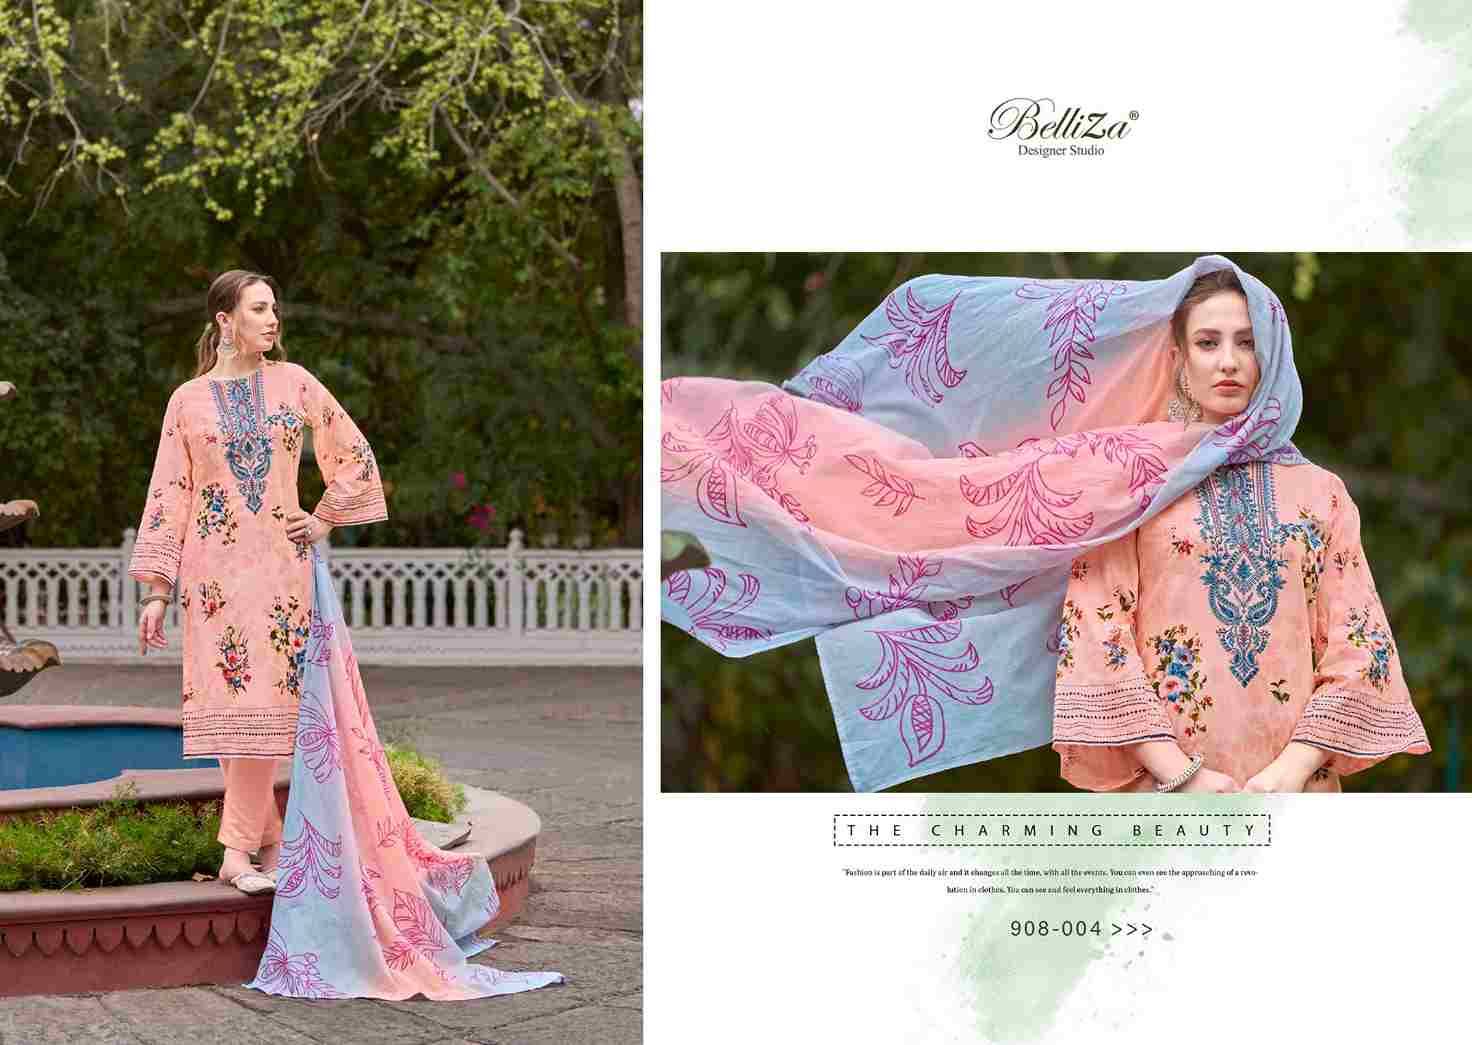 Naira Vol-48 By Belliza 908-001 To 908-008 Series Beautiful Festive Suits Stylish Fancy Colorful Casual Wear & Ethnic Wear Pure Cotton Print Dresses At Wholesale Price